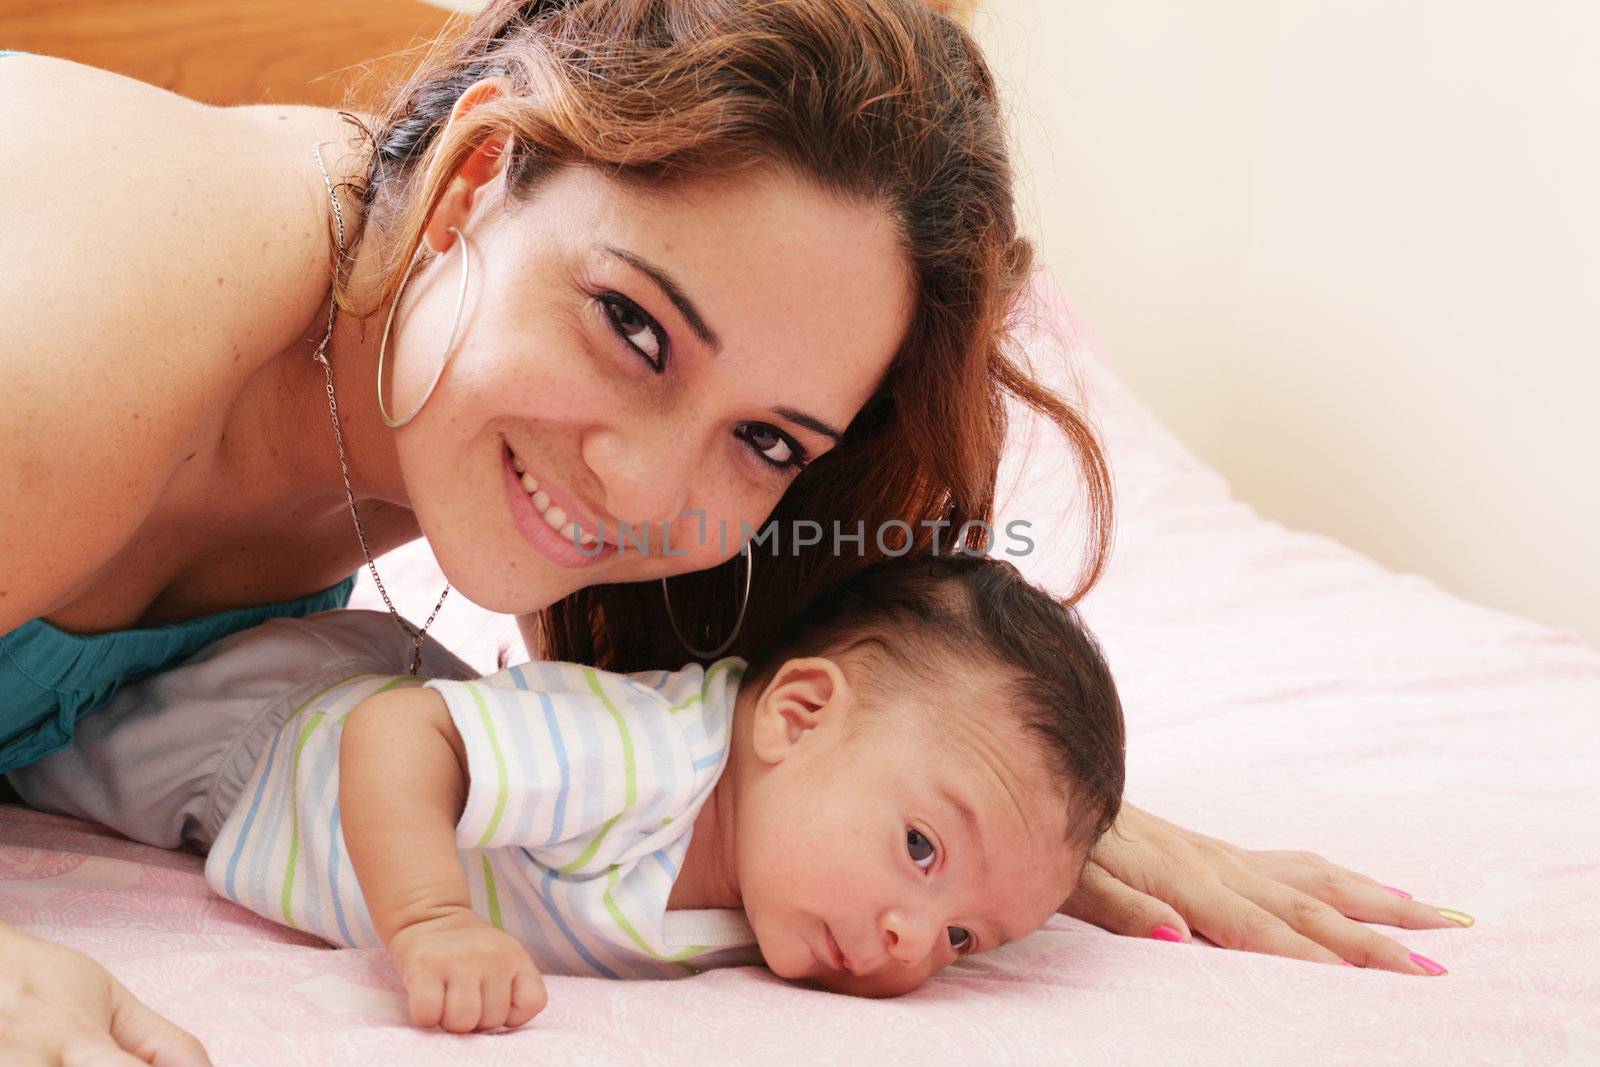 Hispanic mom lying down on bed and holding her infant son